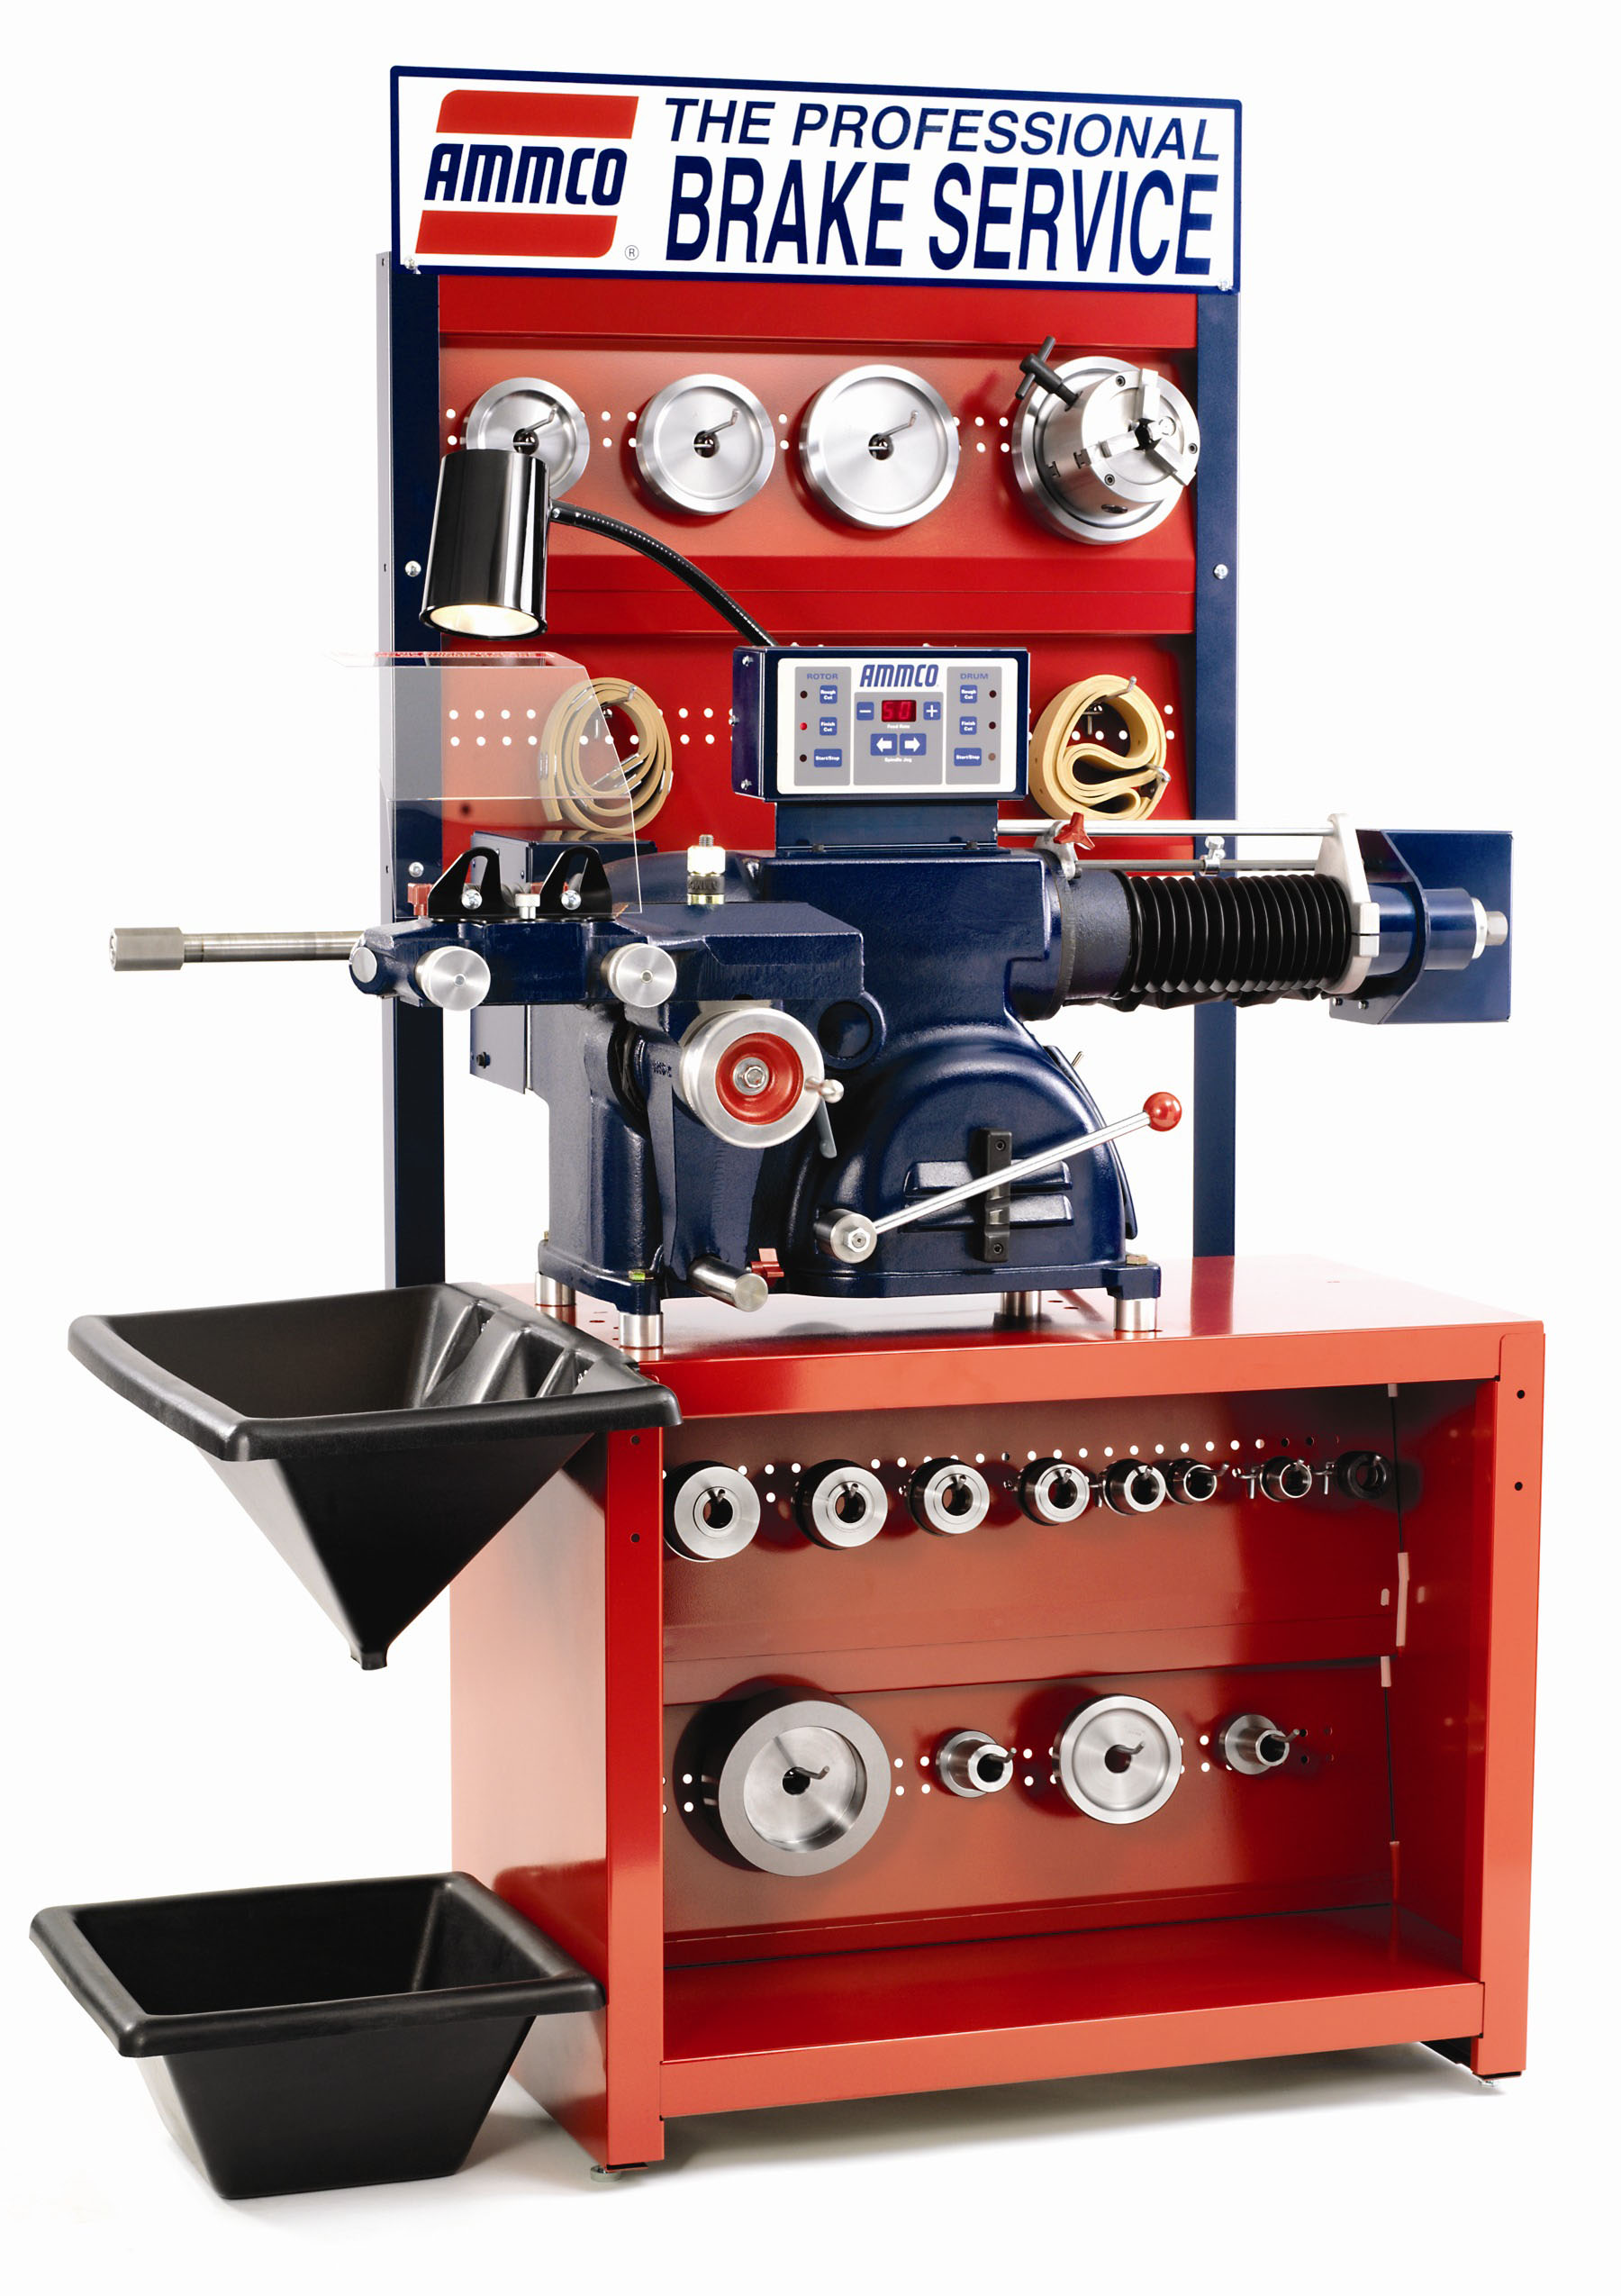 AMMCO 4000E Brake Lathe Now Available To Provide Rotors with Ultimate